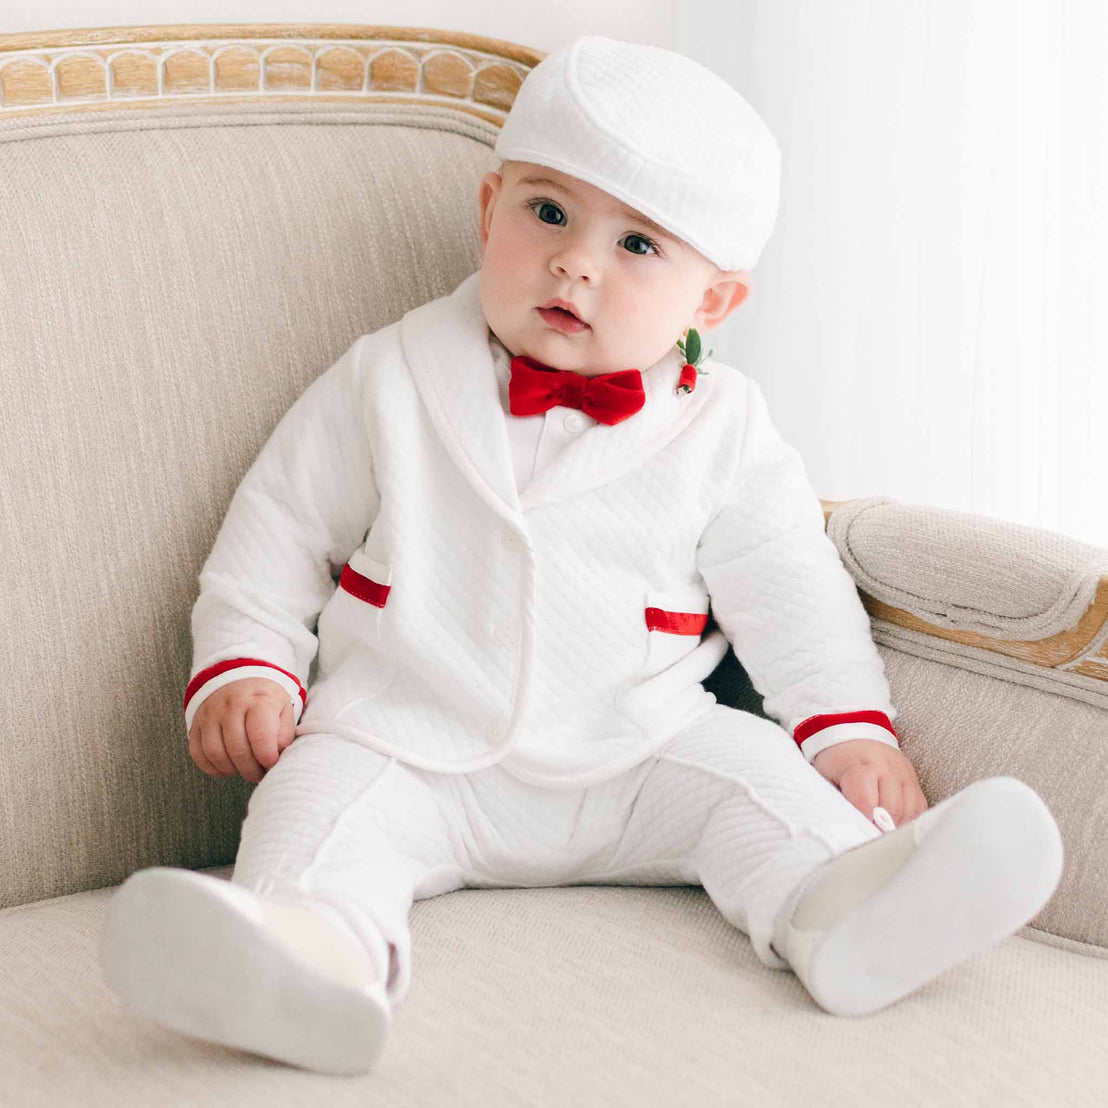 A baby dressed in a Noah 3-Piece Suit | Red Trim with red accents and white shoes sits on a beige sofa, wearing a white cap and looking slightly to the side, ready for a baptism.